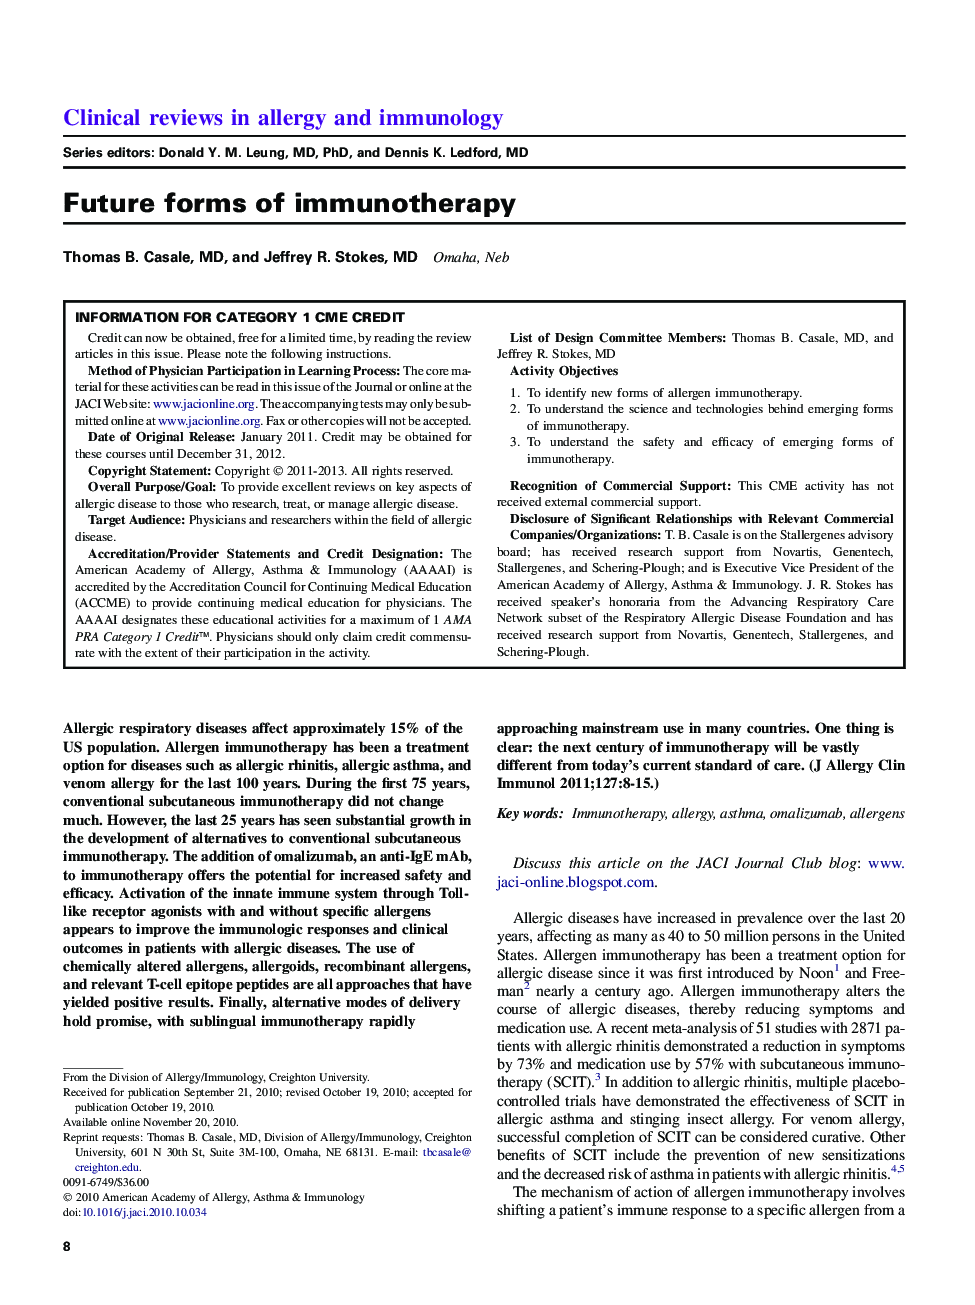 Future forms of immunotherapy 